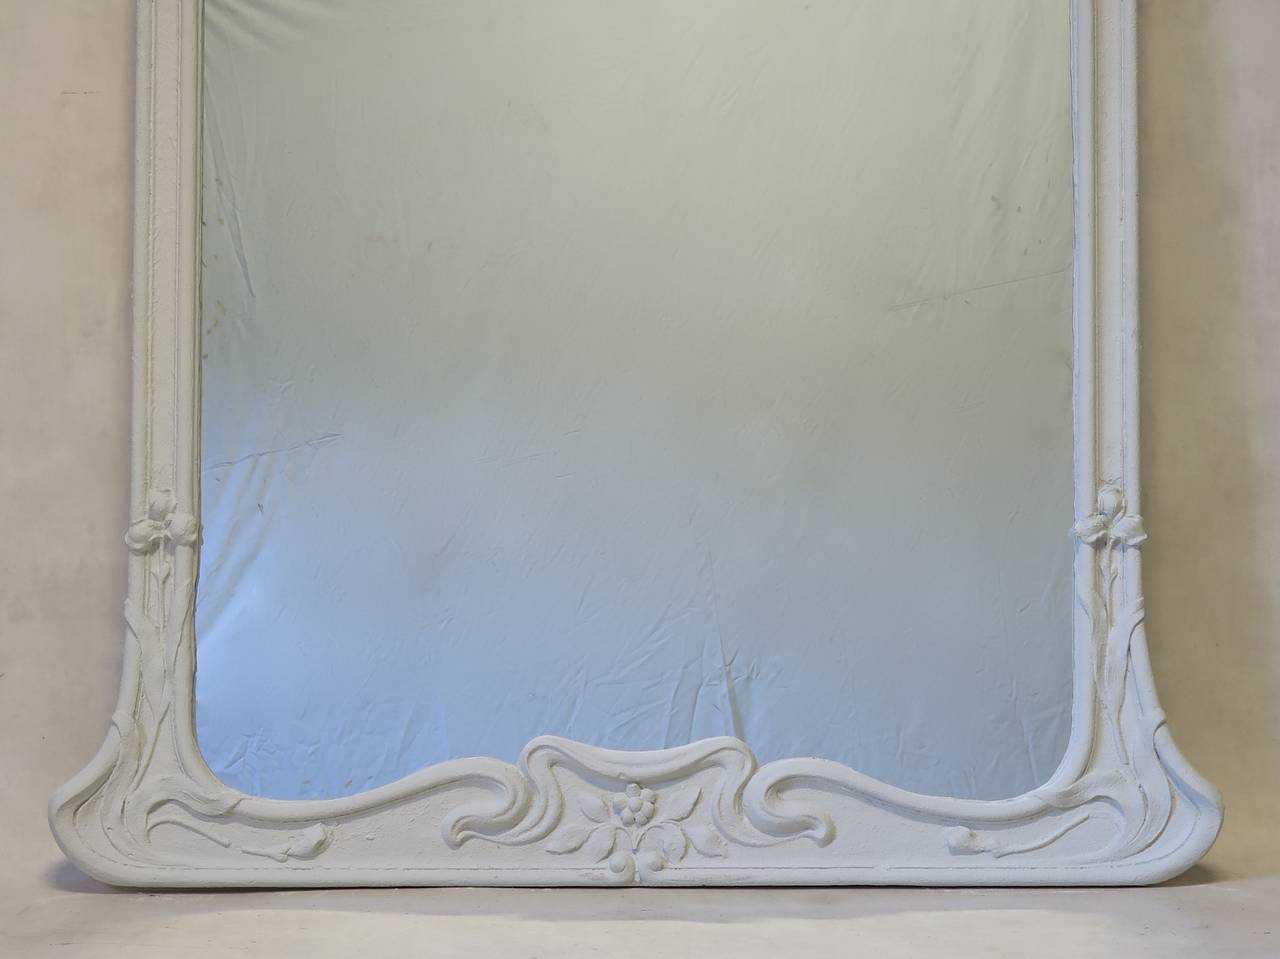 Unusual large mirror (wall or mantle), in pure Art Nouveau style, made in resin and painted a chalky white to imitate plaster. Features graceful lines typical of the style, decorated with daffodils and a woman's head with flowing hair.
Striking,